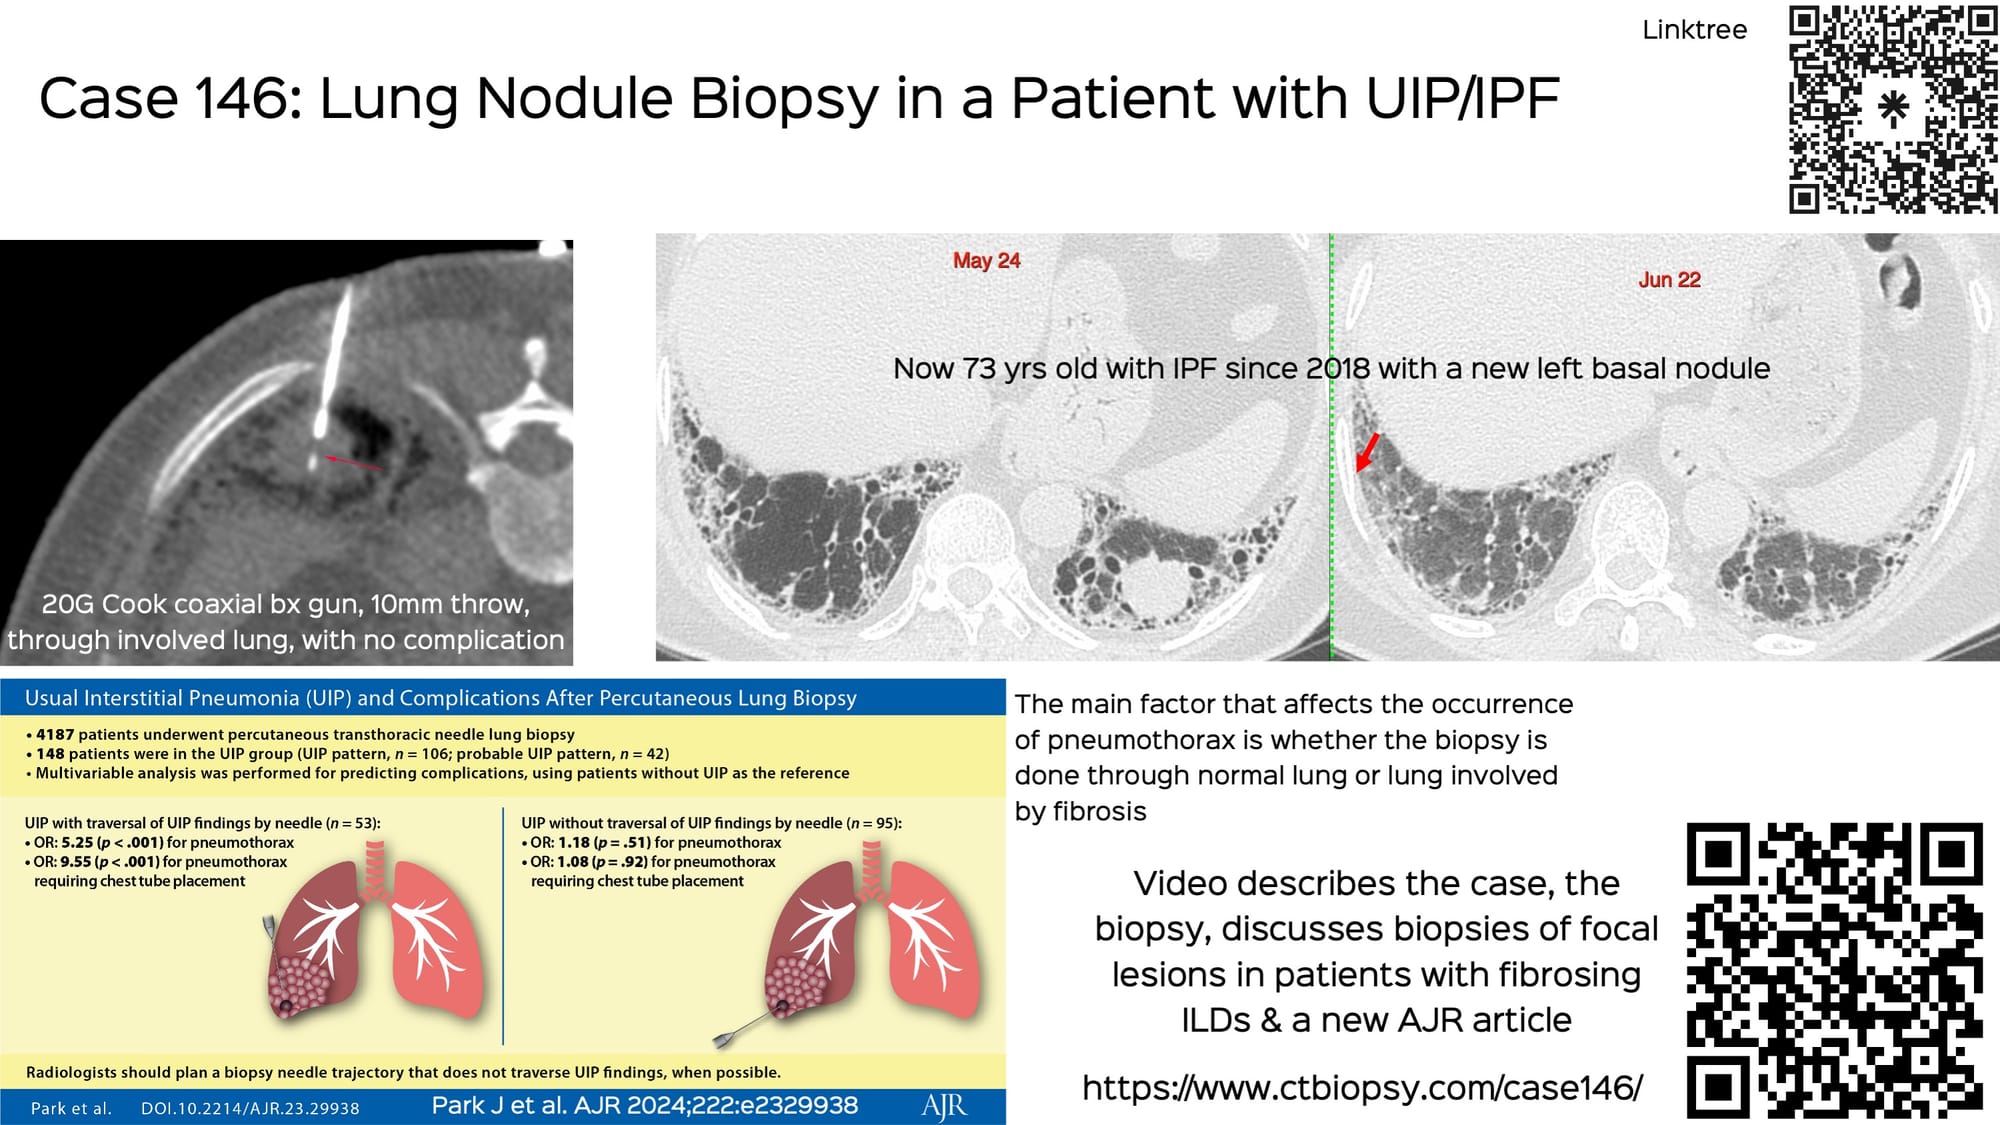 Case 146: Lung Nodule Biopsy in a Patient with UIP/IPF